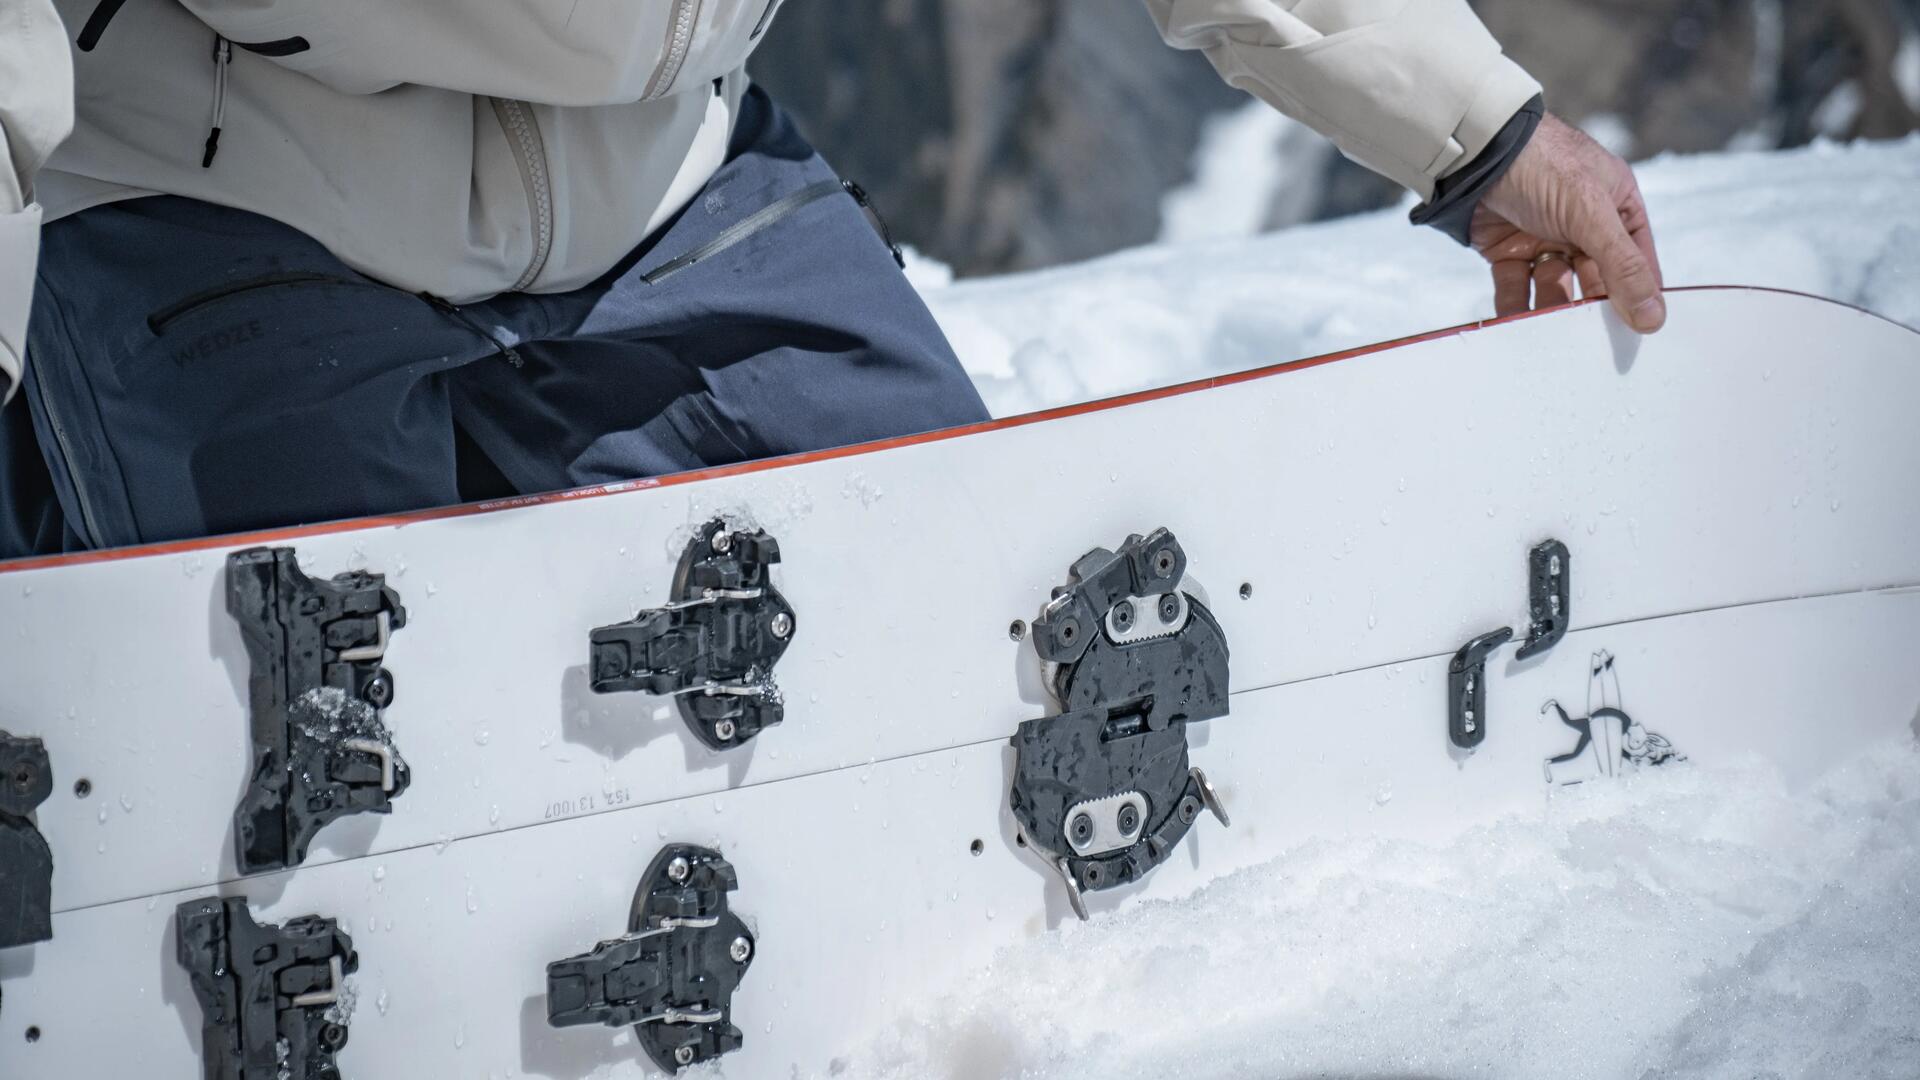 How do you put on and take off your skins when splitboarding?